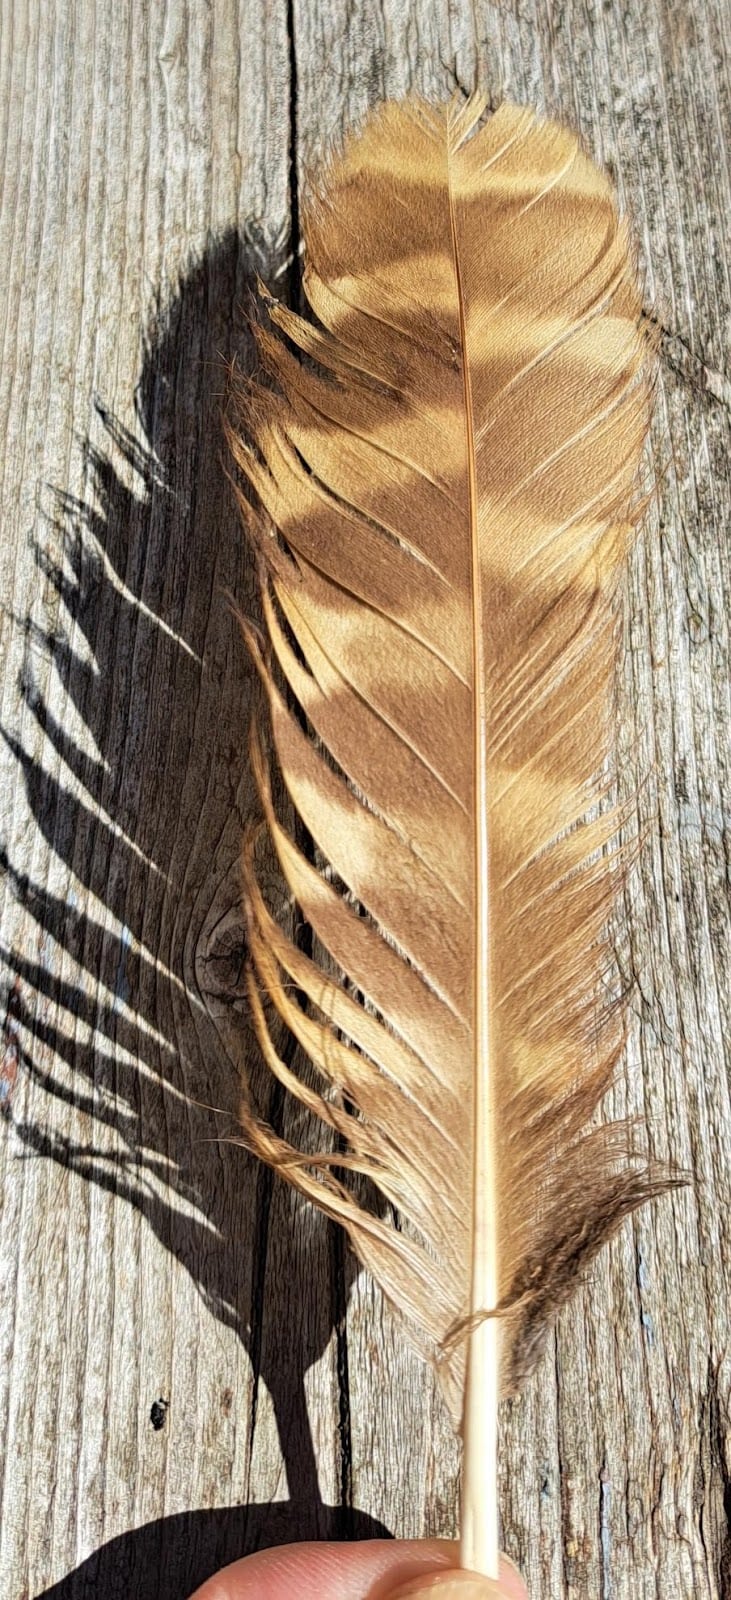 Feather of an owl at the table